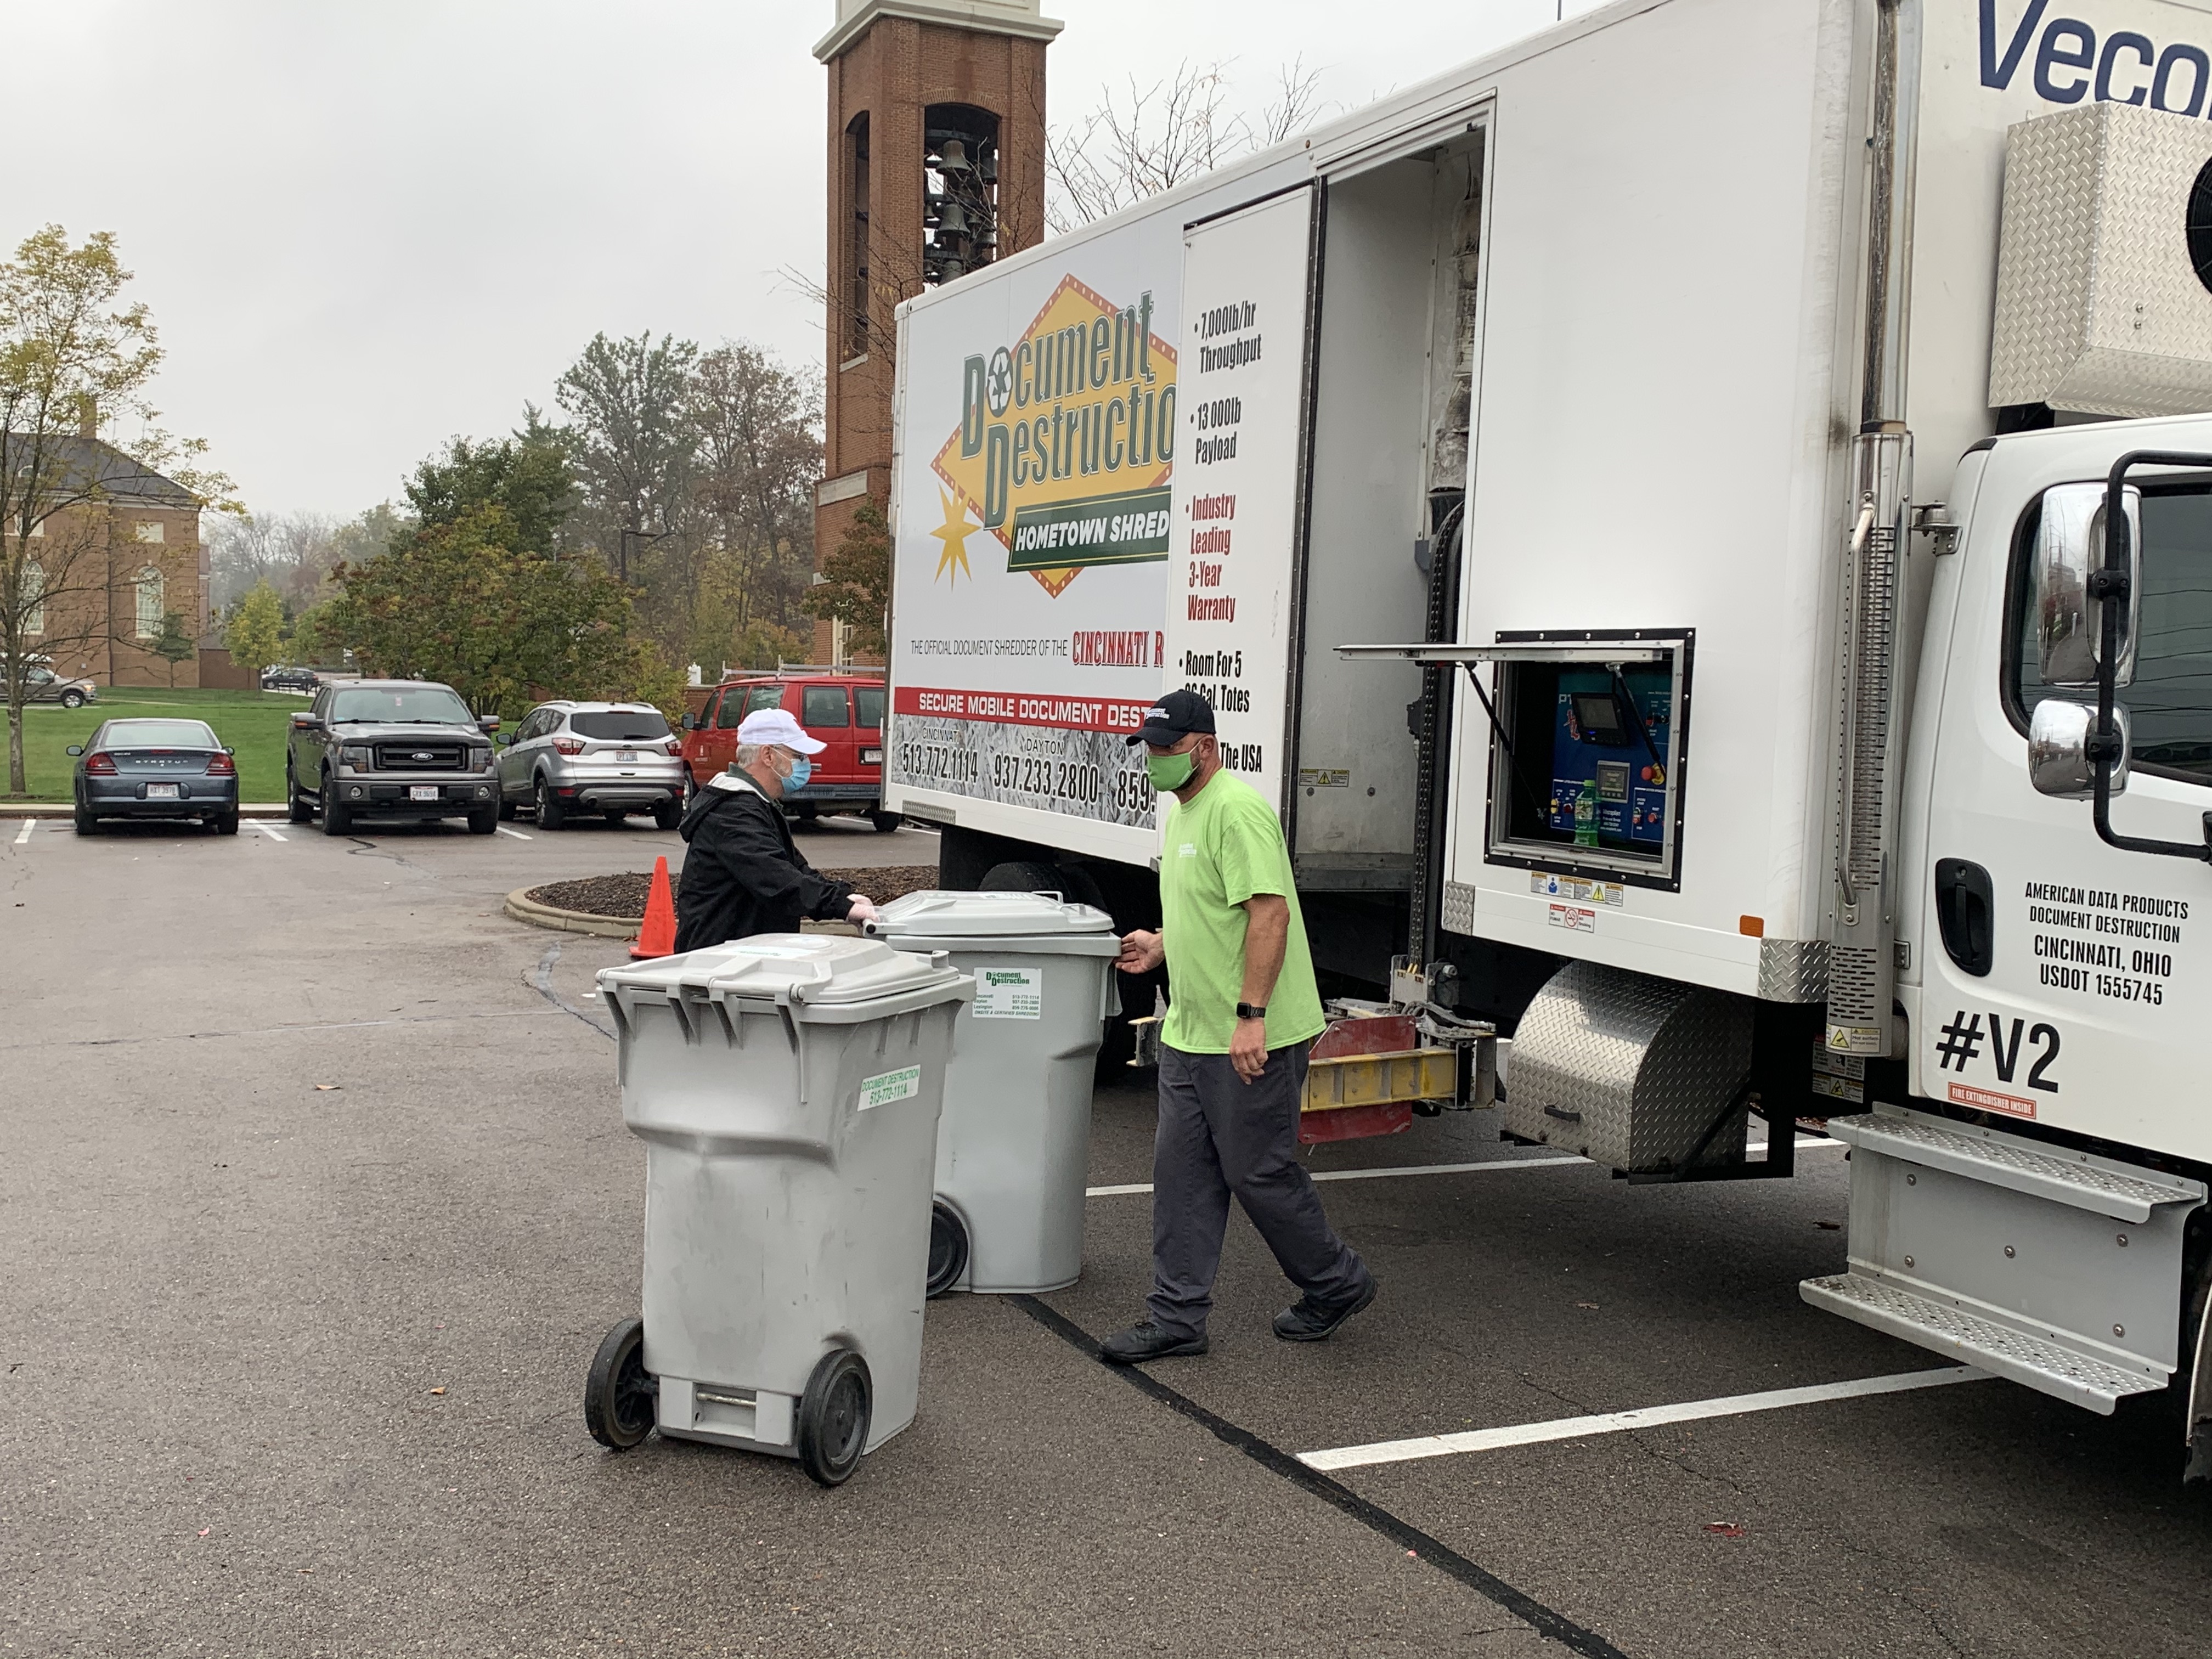 A document shredding truck parked near Cook Field on the Oxford campus to assist with ShredFest 2020